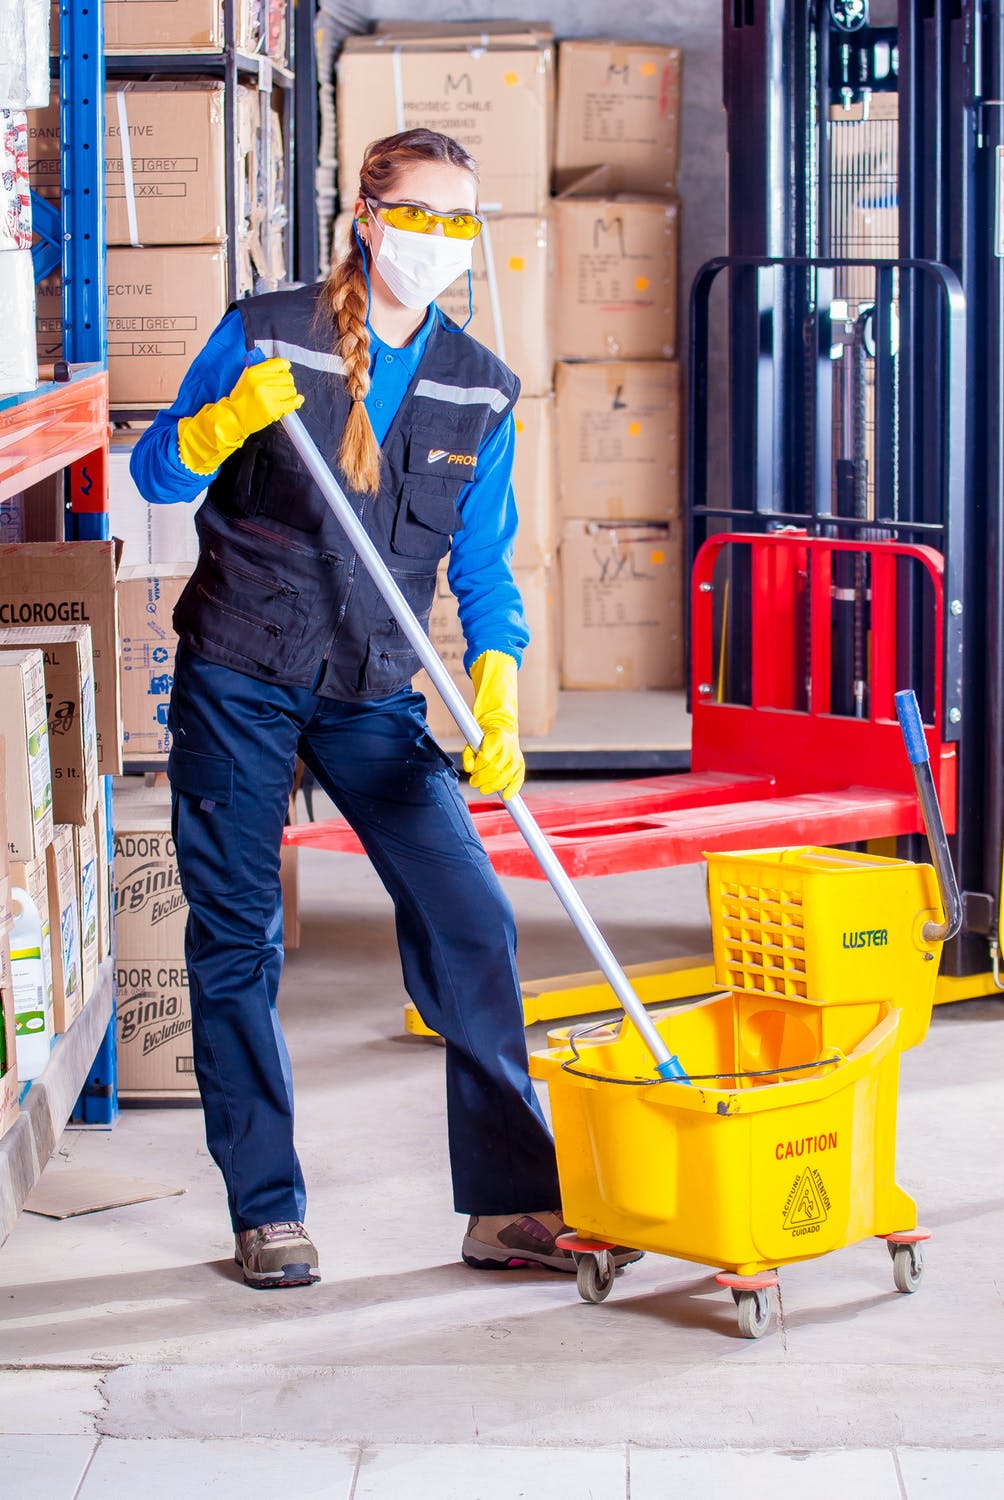 The Top 5 Misconceptions about Hiring a Cleaning Company